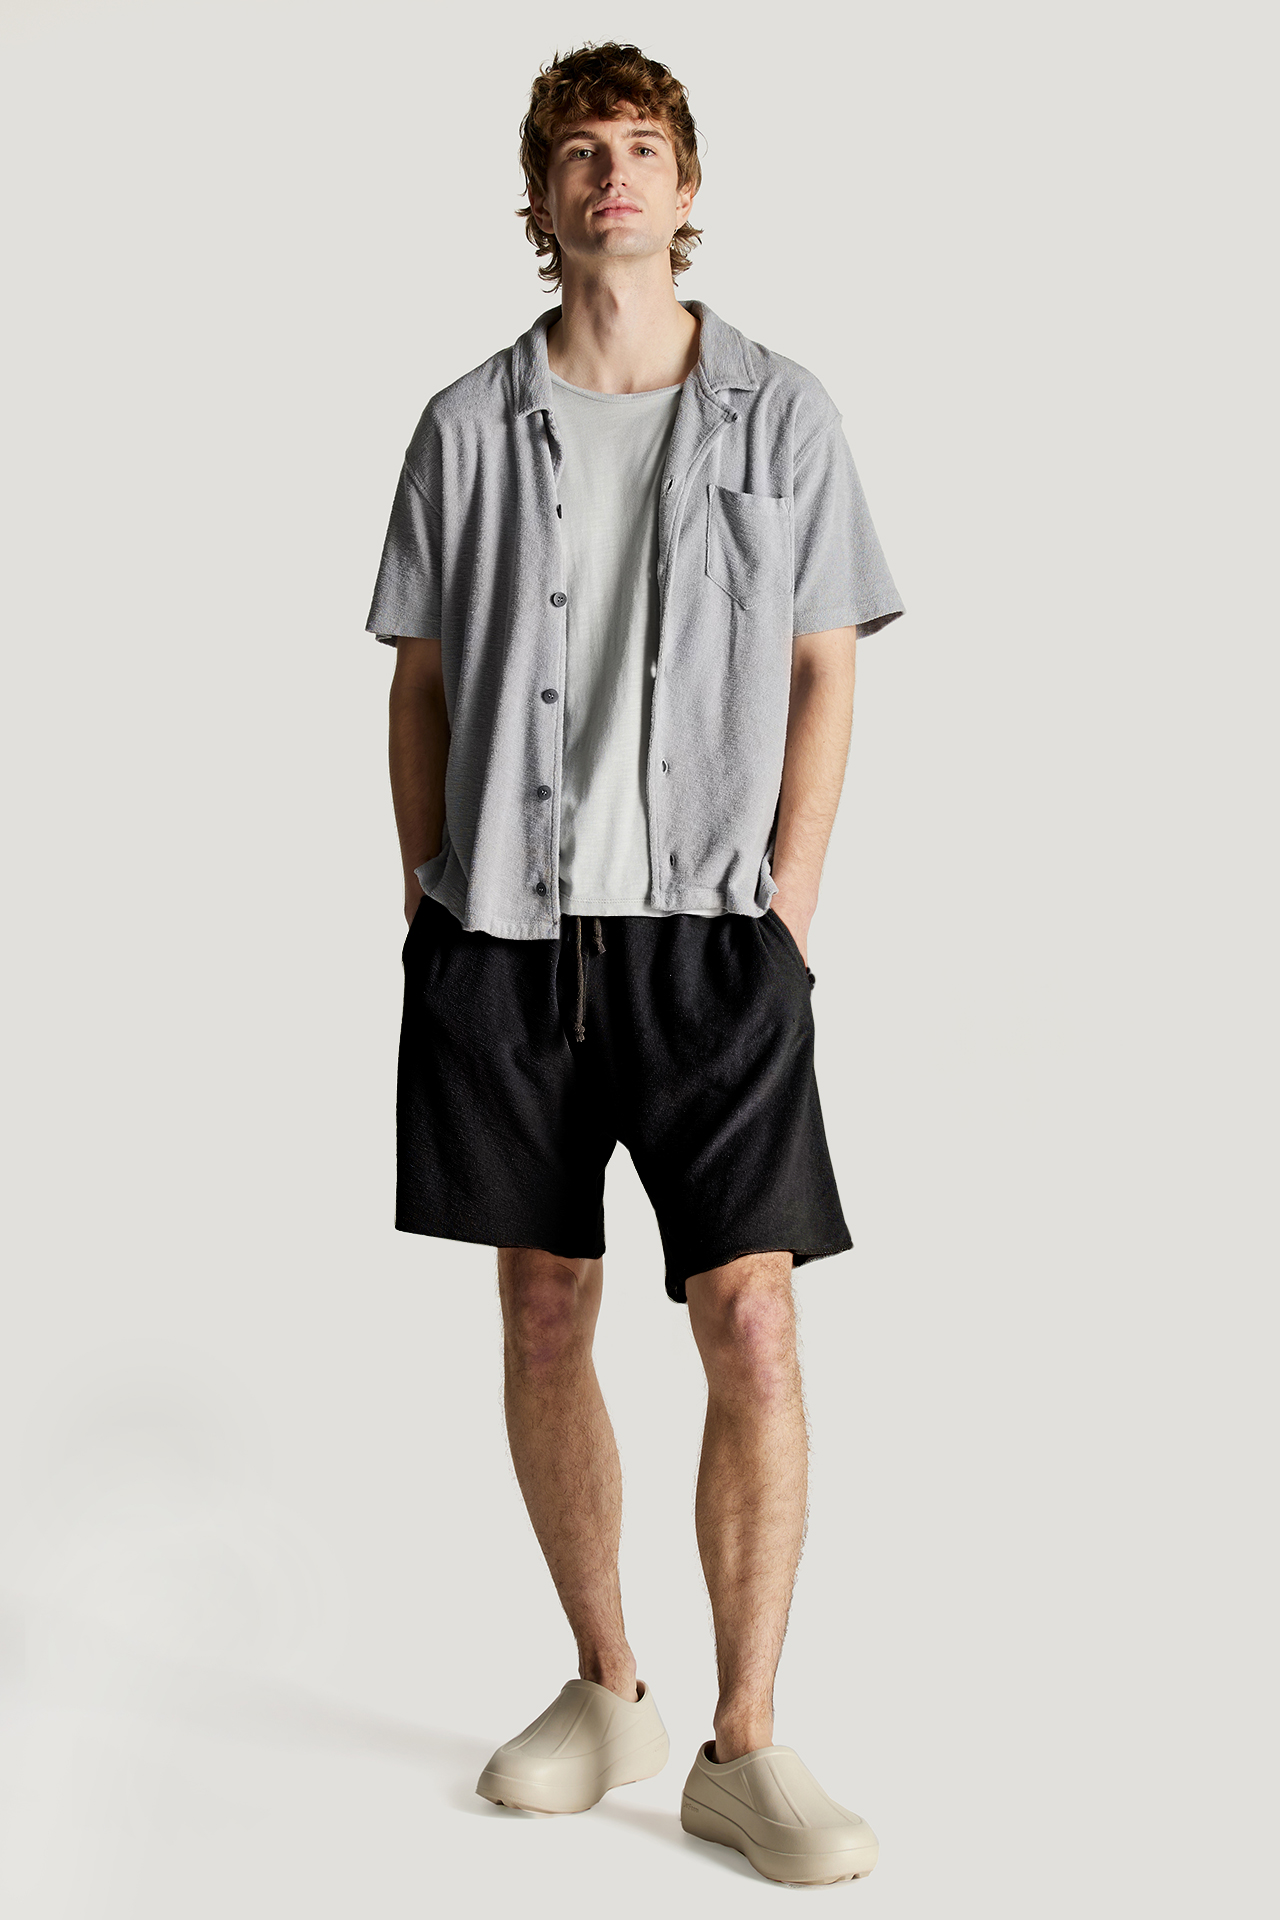 Terry Towel Relaxed Fit Bermuda